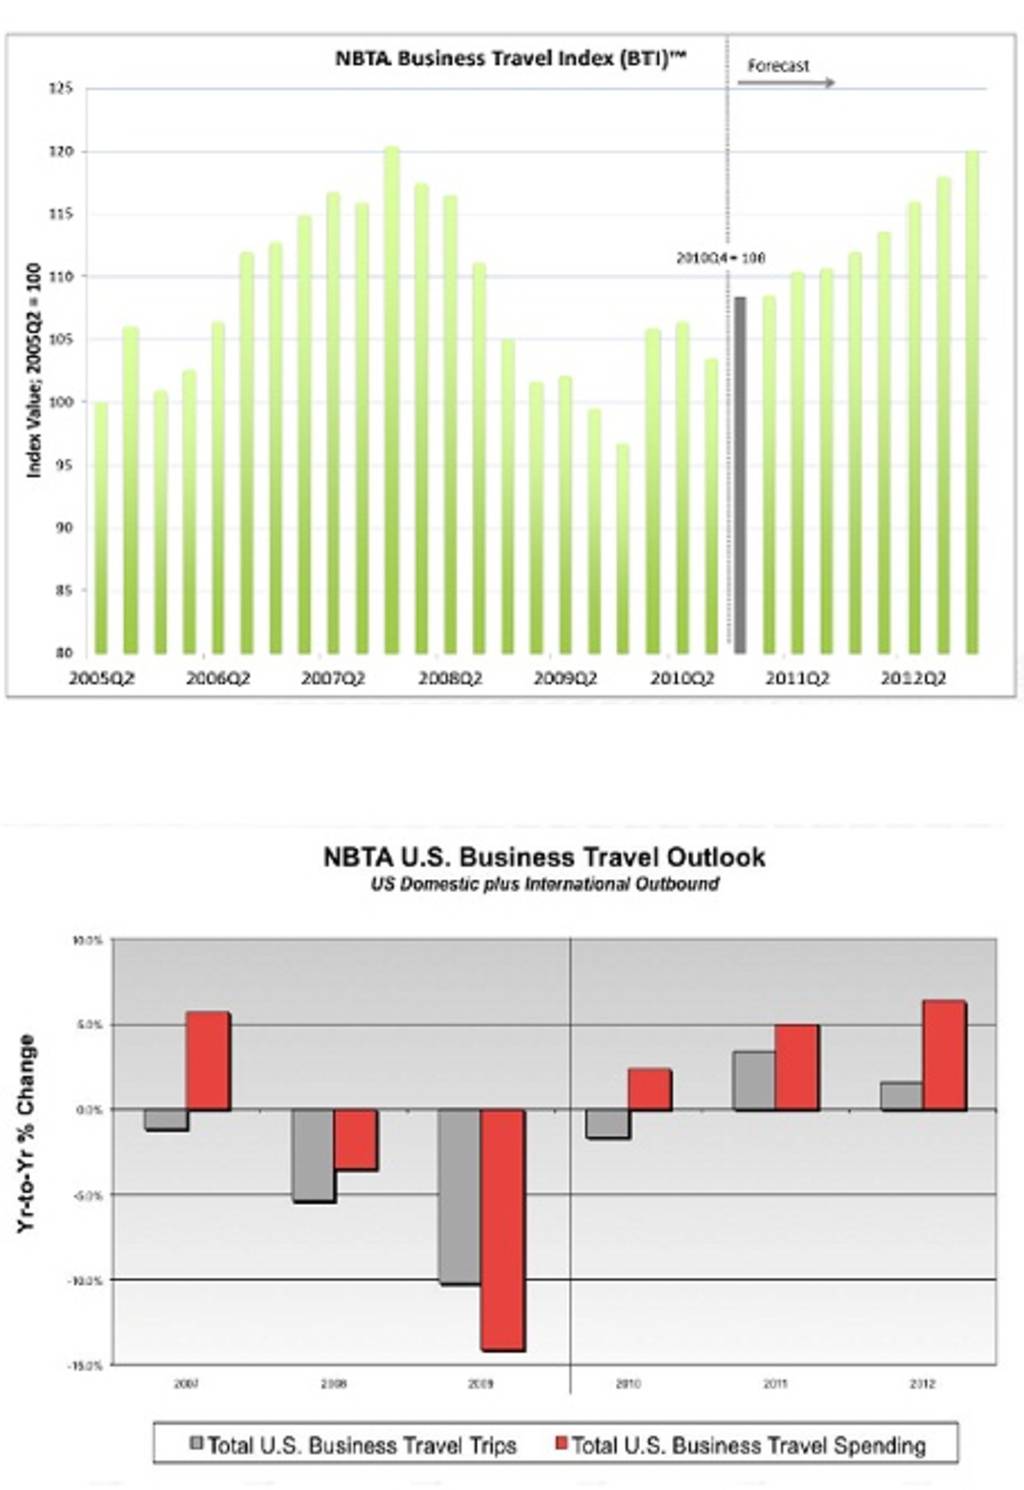 NBTA Finds That Business Travel - A Key Economic Indicator - Will Continue to Improve in 2011